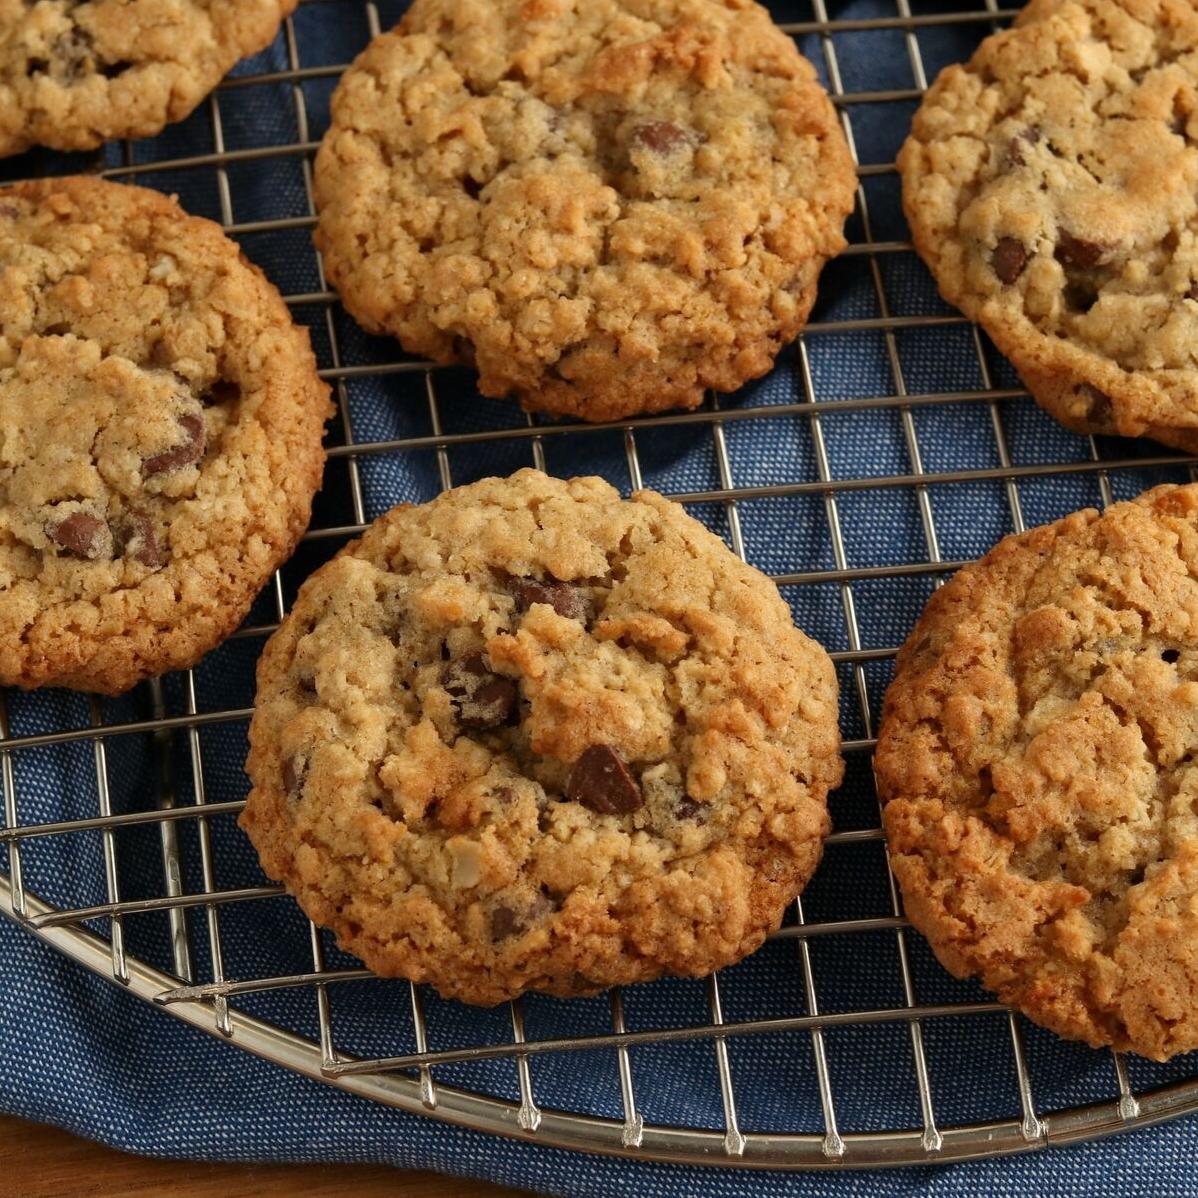  These oatmeal raisin cookies are a healthy and nutritious snack.